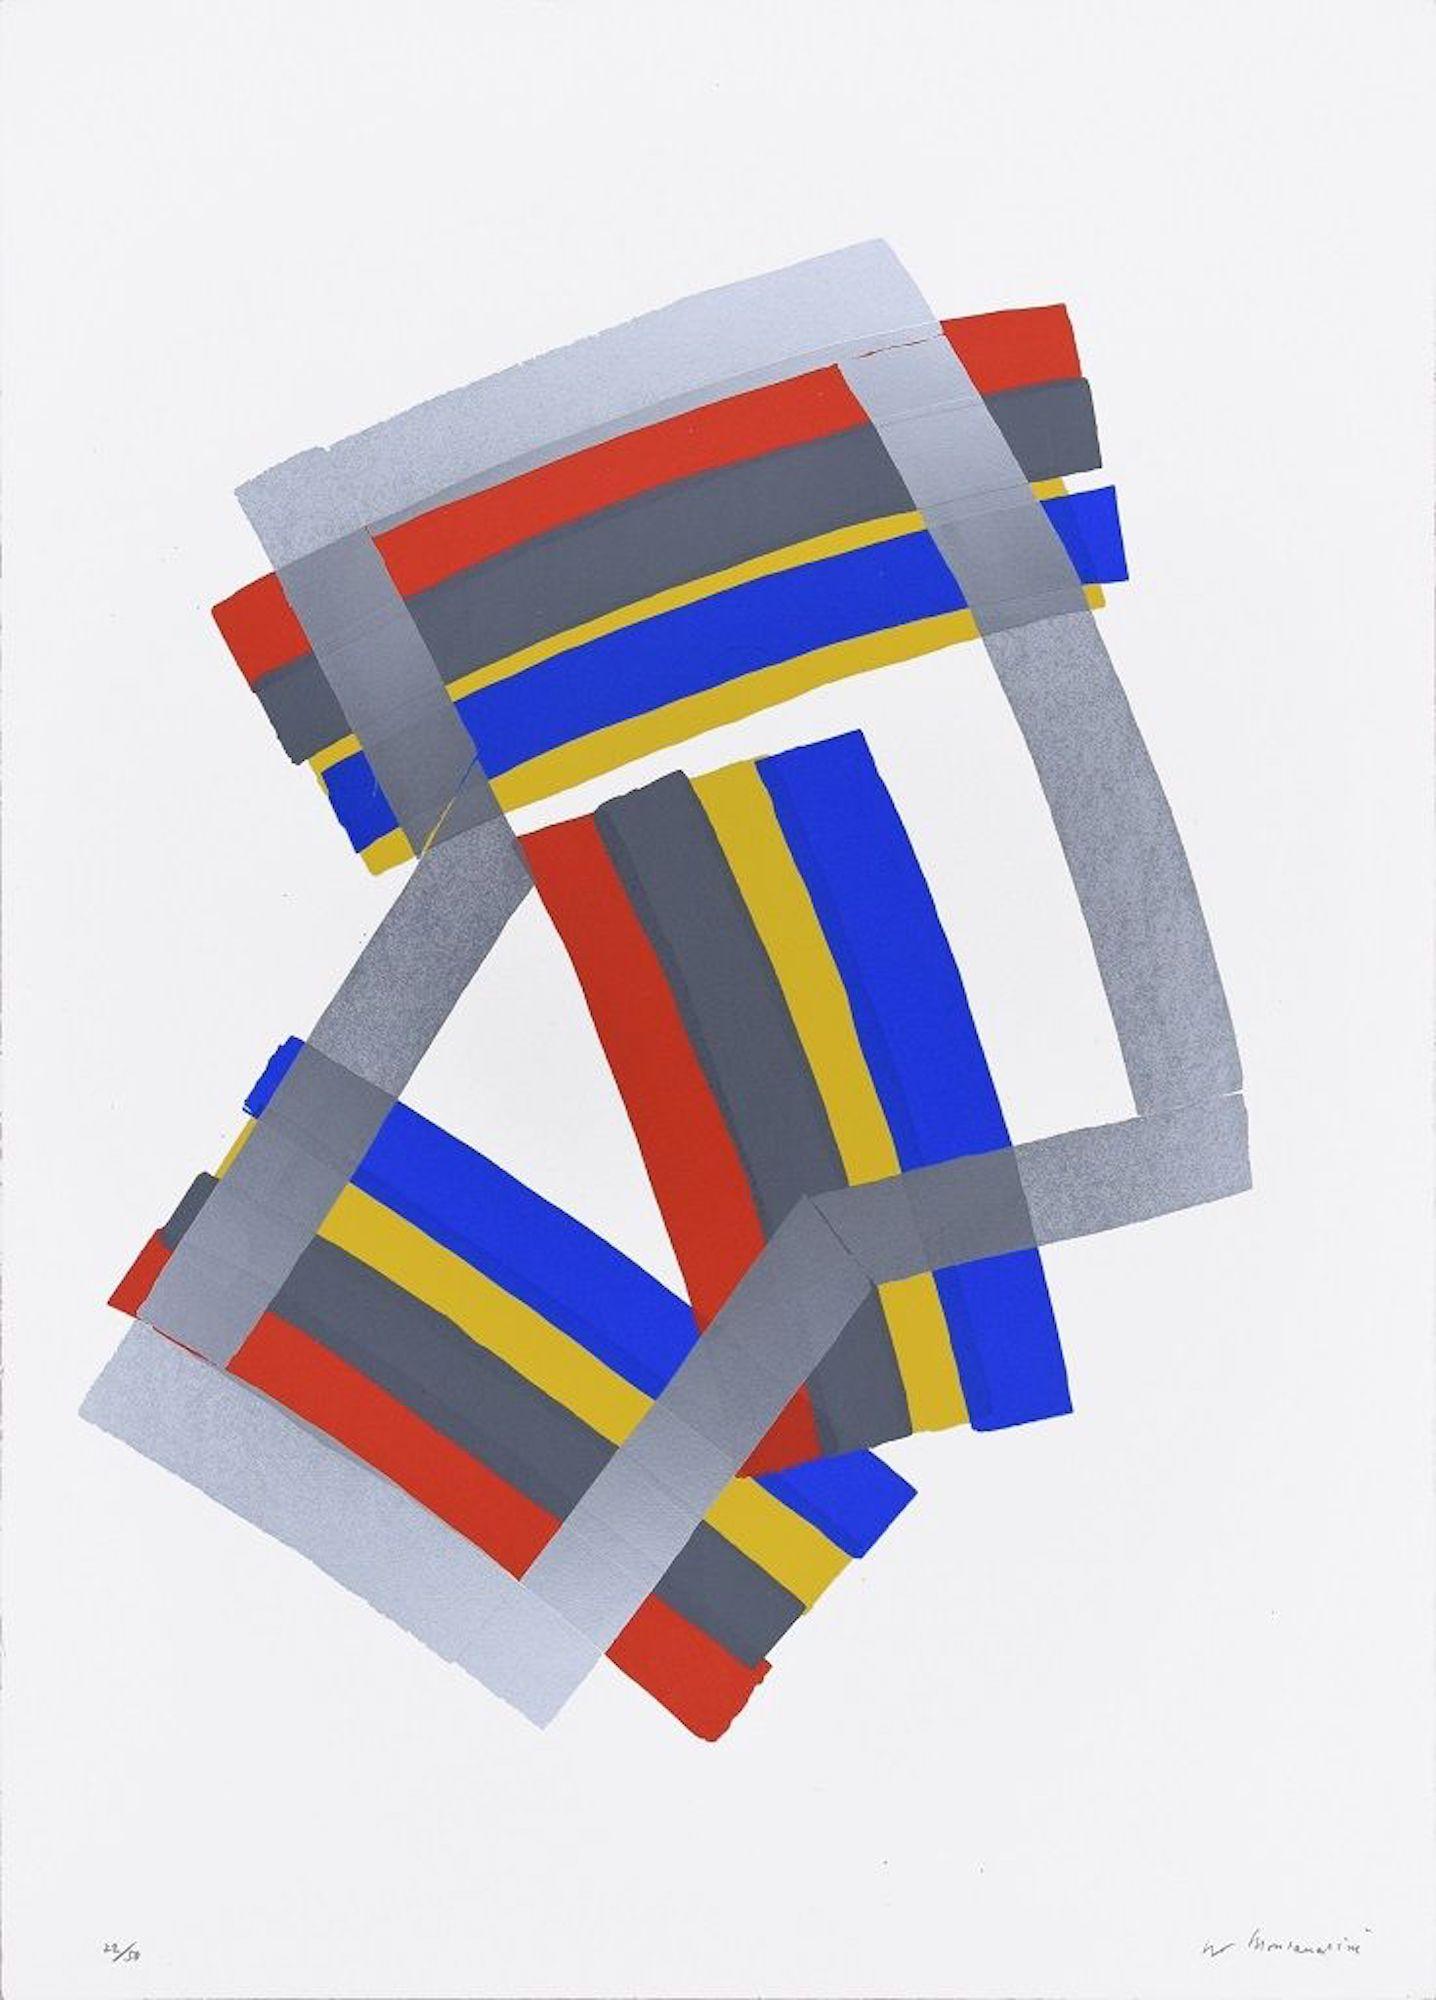 Image dimensions: 54 x 43 cm.

Silver Composition is a beautiful colored serigraph on cream-colored paper, realized in the 1970's by the Italian artist, Luigi Montanarini (1906-1998) and published by EuroMuseum editore, a publishing house of Rome,